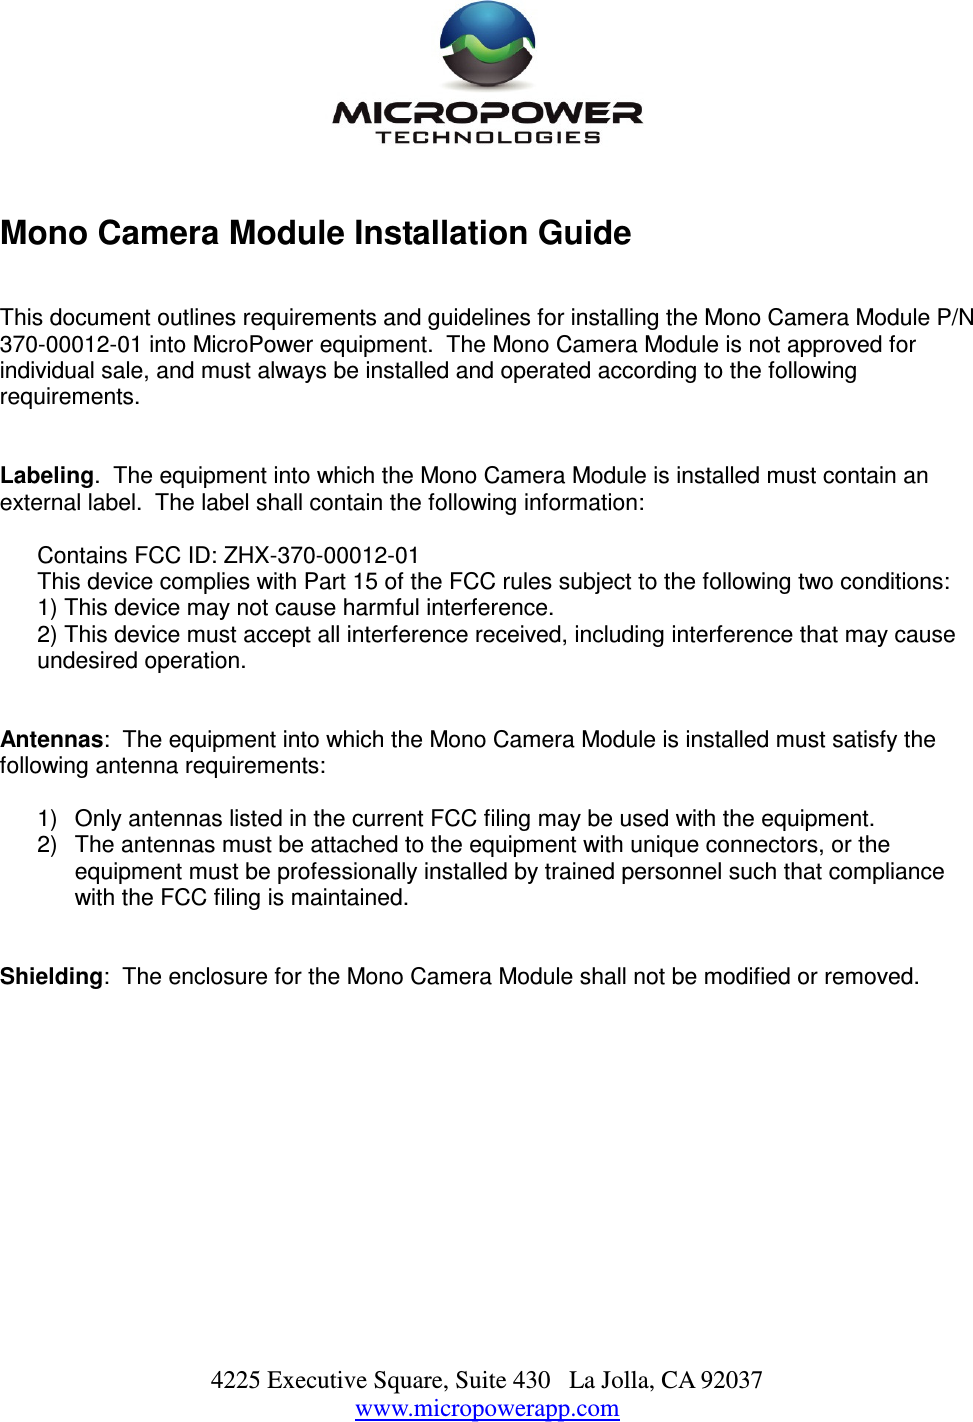 4225 Executive Square, Suite 430   La Jolla, CA 92037 www.micropowerapp.com     Mono Camera Module Installation Guide       This document outlines requirements and guidelines for installing the Mono Camera Module P/N 370-00012-01 into MicroPower equipment.  The Mono Camera Module is not approved for individual sale, and must always be installed and operated according to the following requirements.   Labeling.  The equipment into which the Mono Camera Module is installed must contain an external label.  The label shall contain the following information:  Contains FCC ID: ZHX-370-00012-01 This device complies with Part 15 of the FCC rules subject to the following two conditions: 1) This device may not cause harmful interference. 2) This device must accept all interference received, including interference that may cause undesired operation.      Antennas:  The equipment into which the Mono Camera Module is installed must satisfy the following antenna requirements:  1)  Only antennas listed in the current FCC filing may be used with the equipment. 2)  The antennas must be attached to the equipment with unique connectors, or the equipment must be professionally installed by trained personnel such that compliance with the FCC filing is maintained.   Shielding:  The enclosure for the Mono Camera Module shall not be modified or removed.   